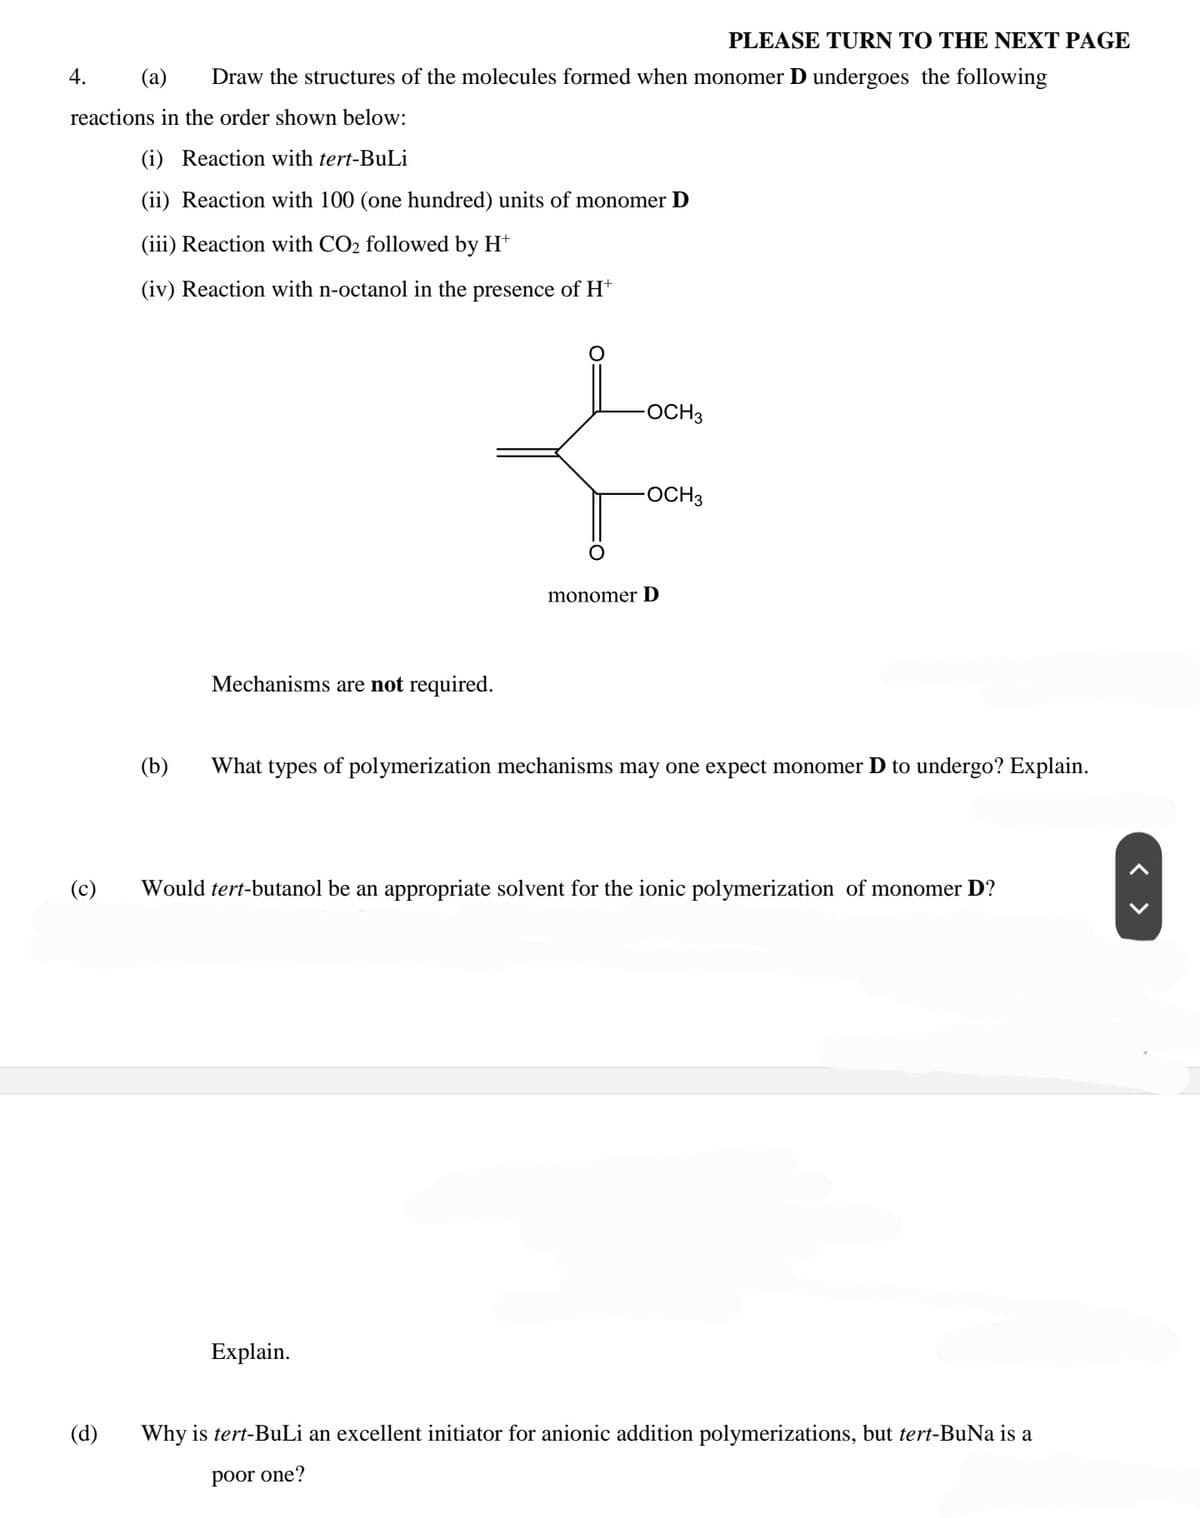 PLEASE TURN TO THE NEXT PAGE
4.
(a)
Draw the structures of the molecules formed when monomer D undergoes the following
reactions in the order shown below:
(i) Reaction with tert-BuLi
(ii) Reaction with 100 (one hundred) units of monomer D
(iii) Reaction with CO2 followed by H*
(iv) Reaction with n-octanol in the presence of H*
OCH3
OCH3
monomer D
Mechanisms are not required.
(b)
What types of polymerization mechanisms may one expect monomer D to undergo? Explain.
(c)
Would tert-butanol be an appropriate solvent for the ionic polymerization of monomer D?
Explain.
(d)
Why is tert-BuLi an excellent initiator for anionic addition polymerizations, but tert-BuNa is a
poor one?
< >
